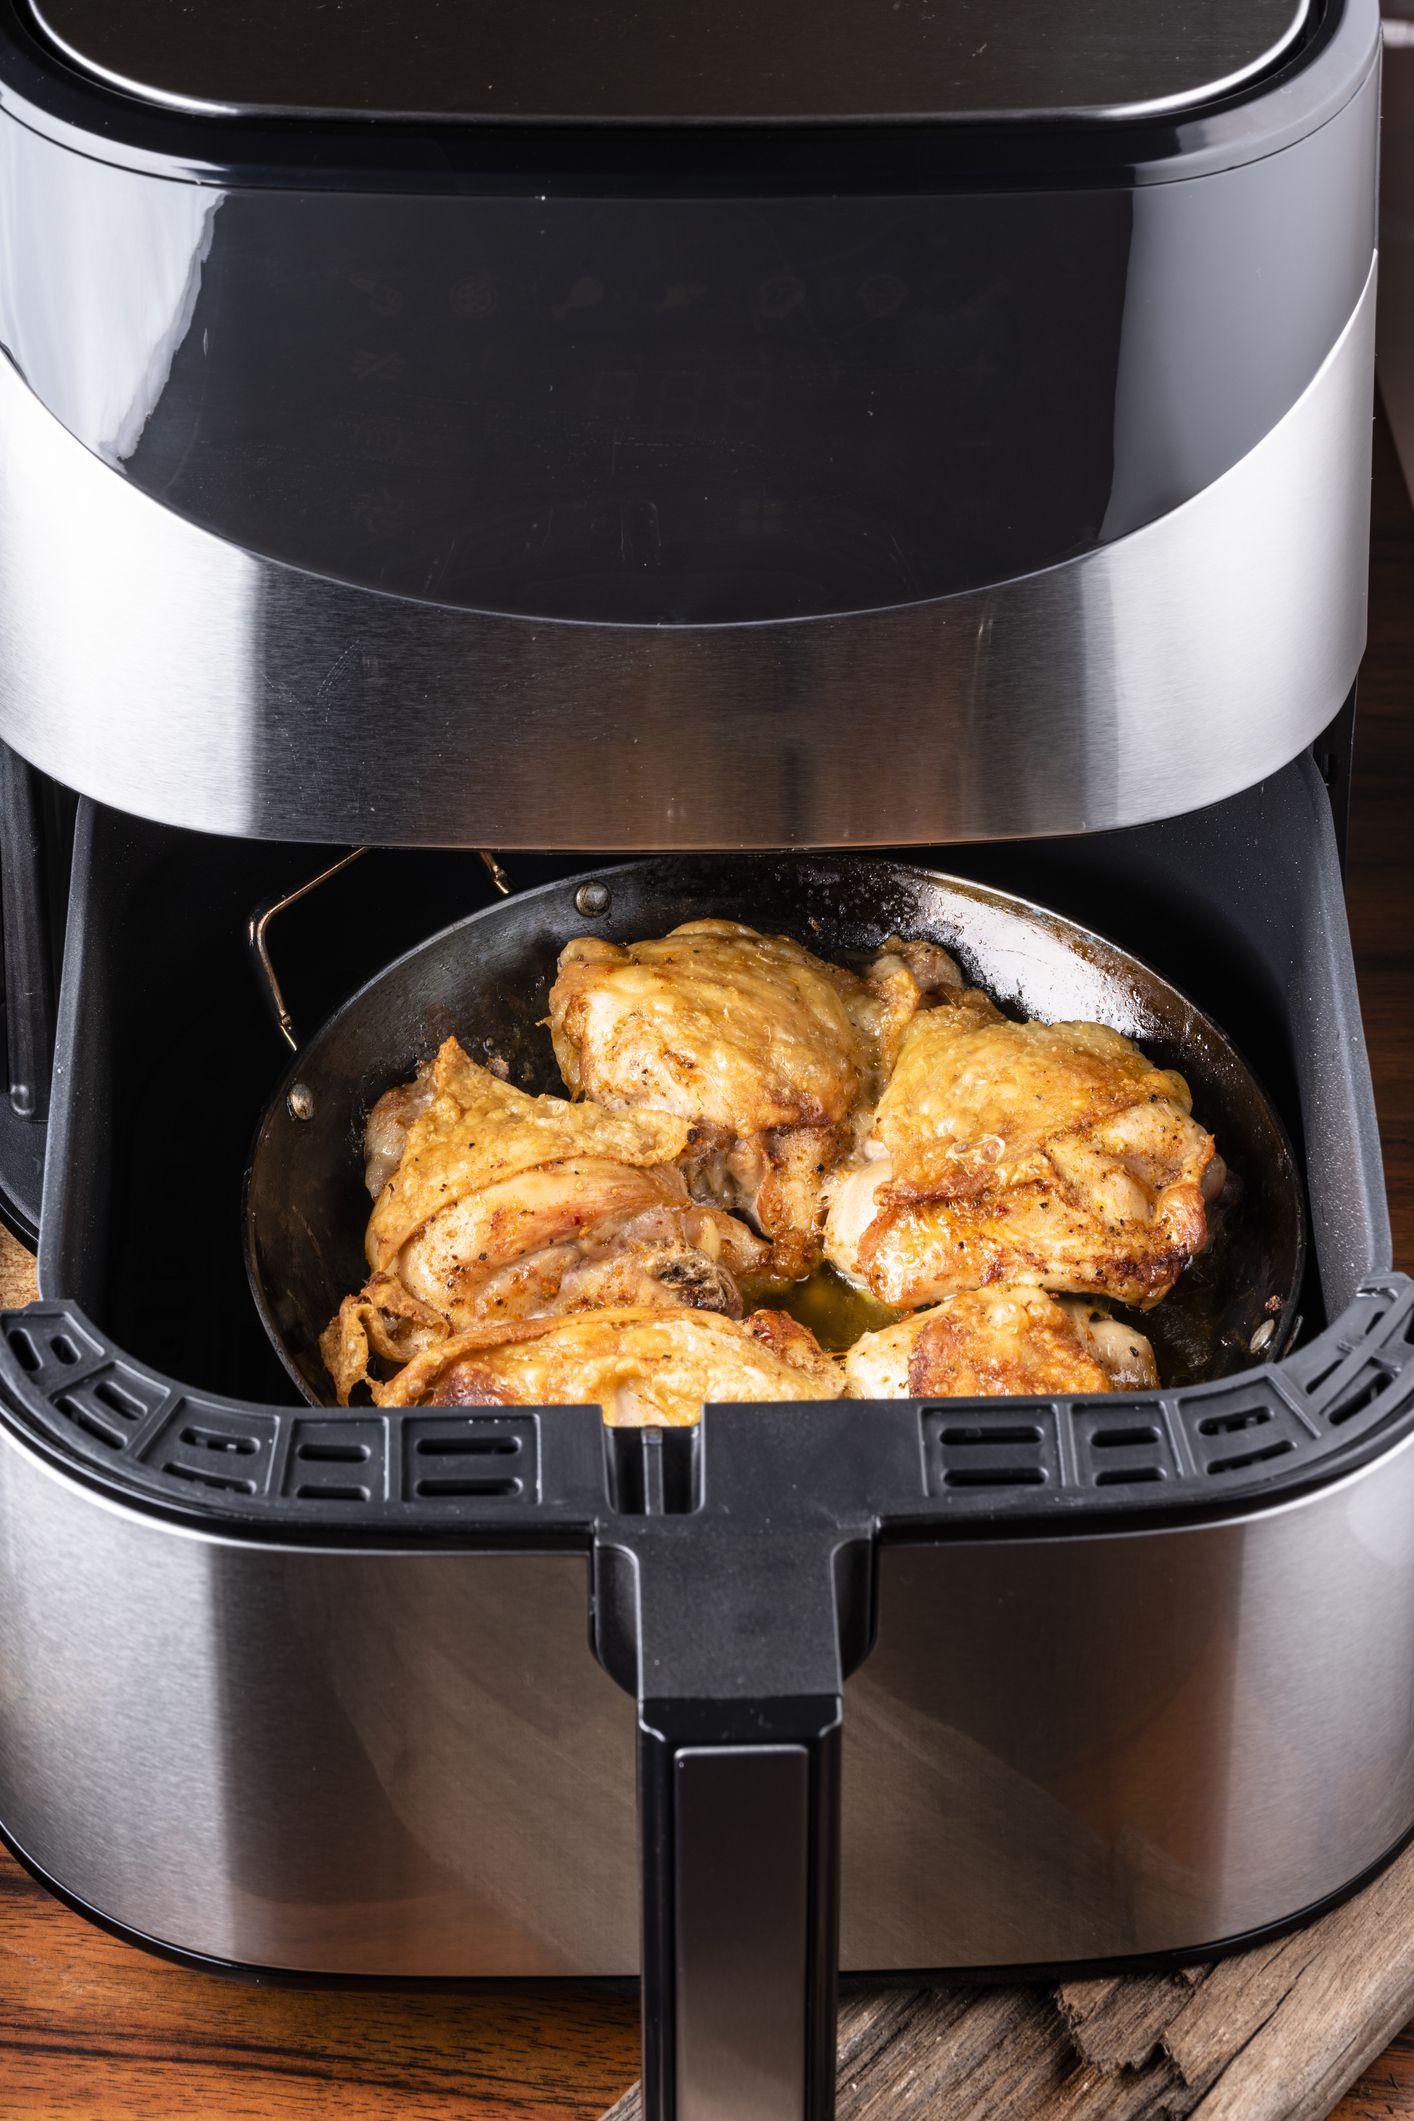 Tips] 10 Tips for Using the Airfryer - The Hedgehog Knows